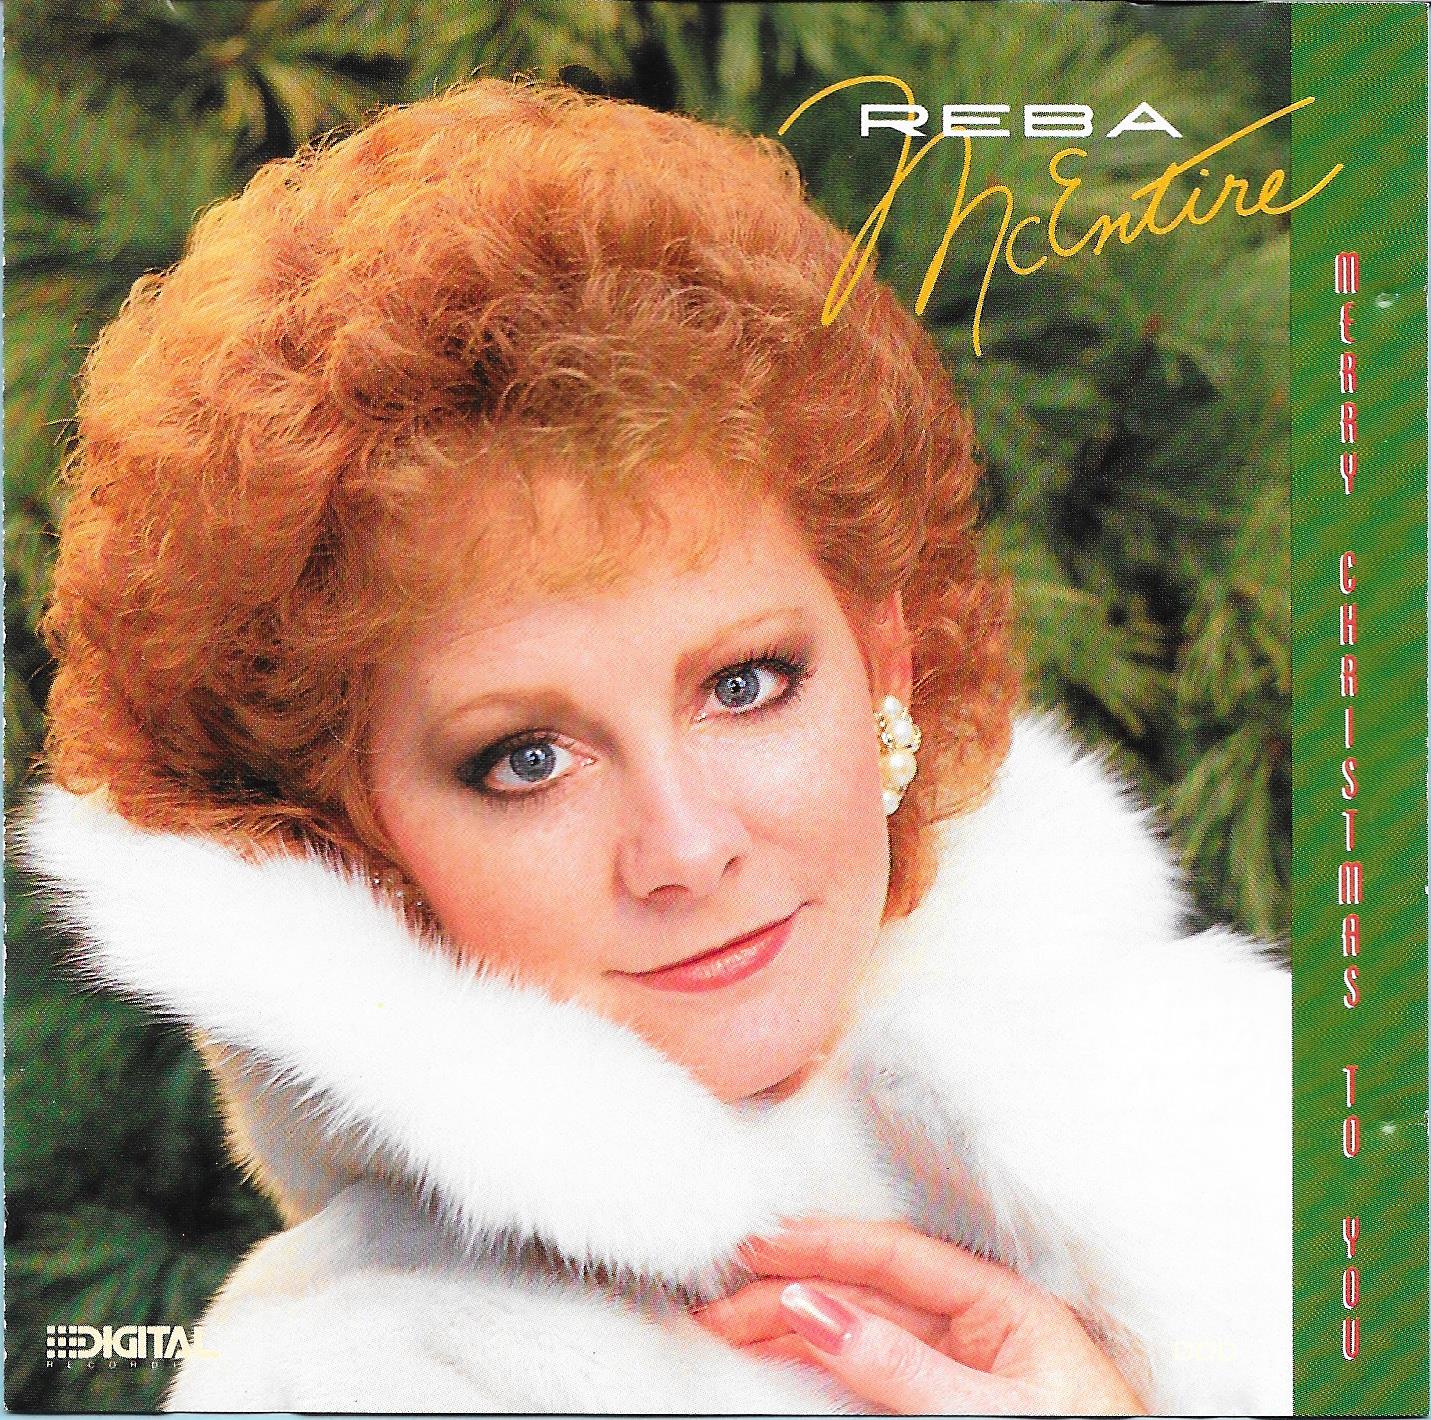 Art for On This Day by Reba McEntire